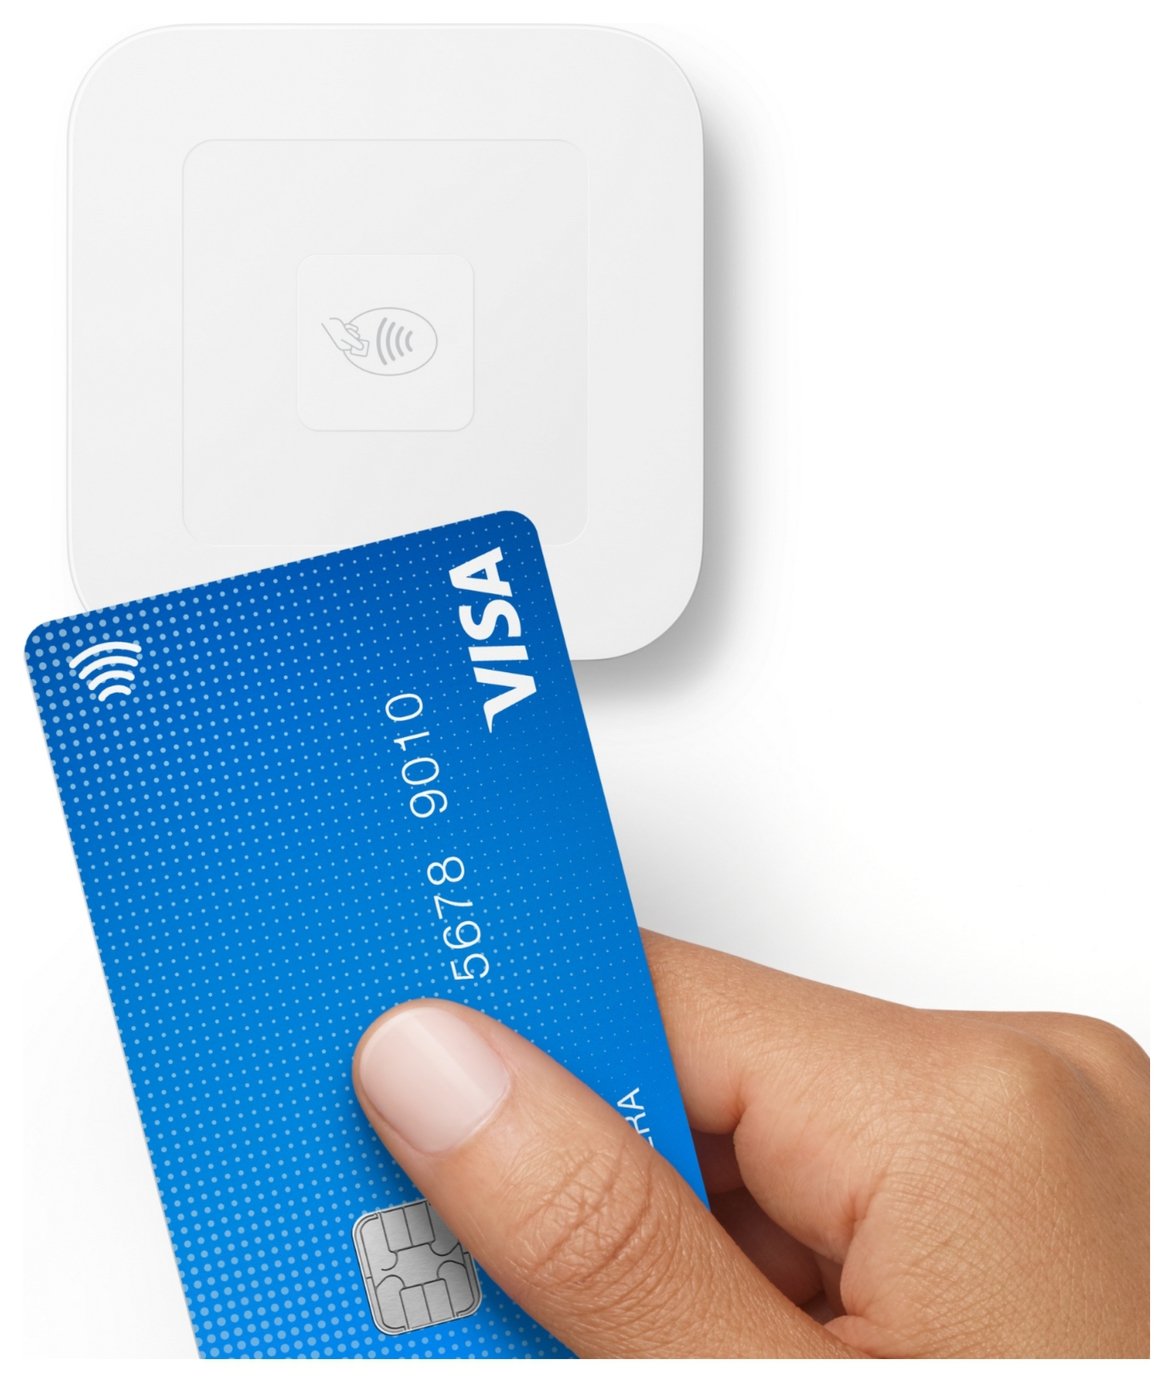 Square Card Payment Reader (2nd Generation)